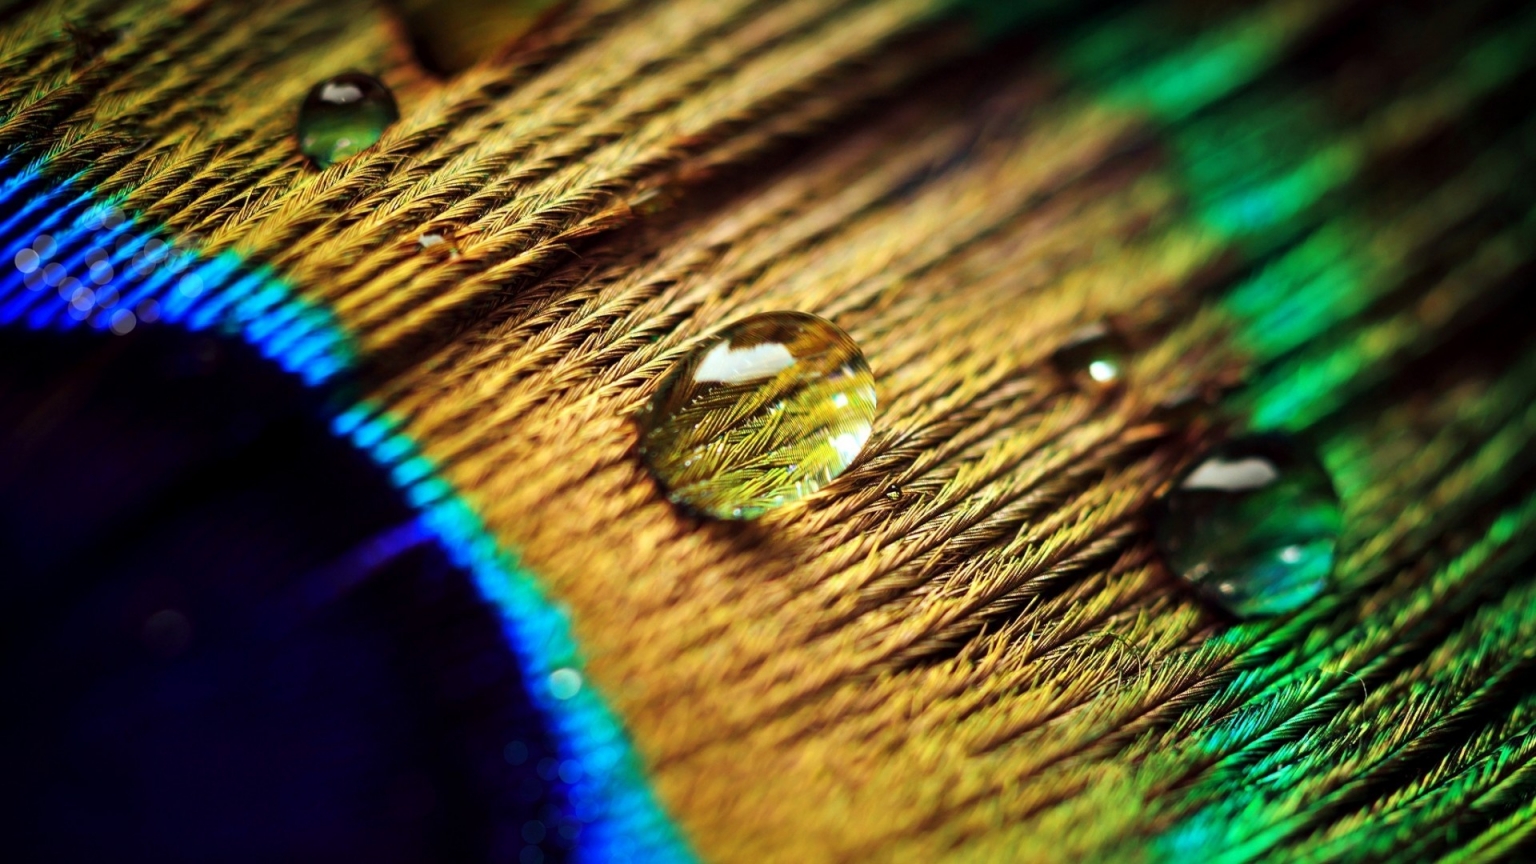 Peacock Feather Drops for 1536 x 864 HDTV resolution